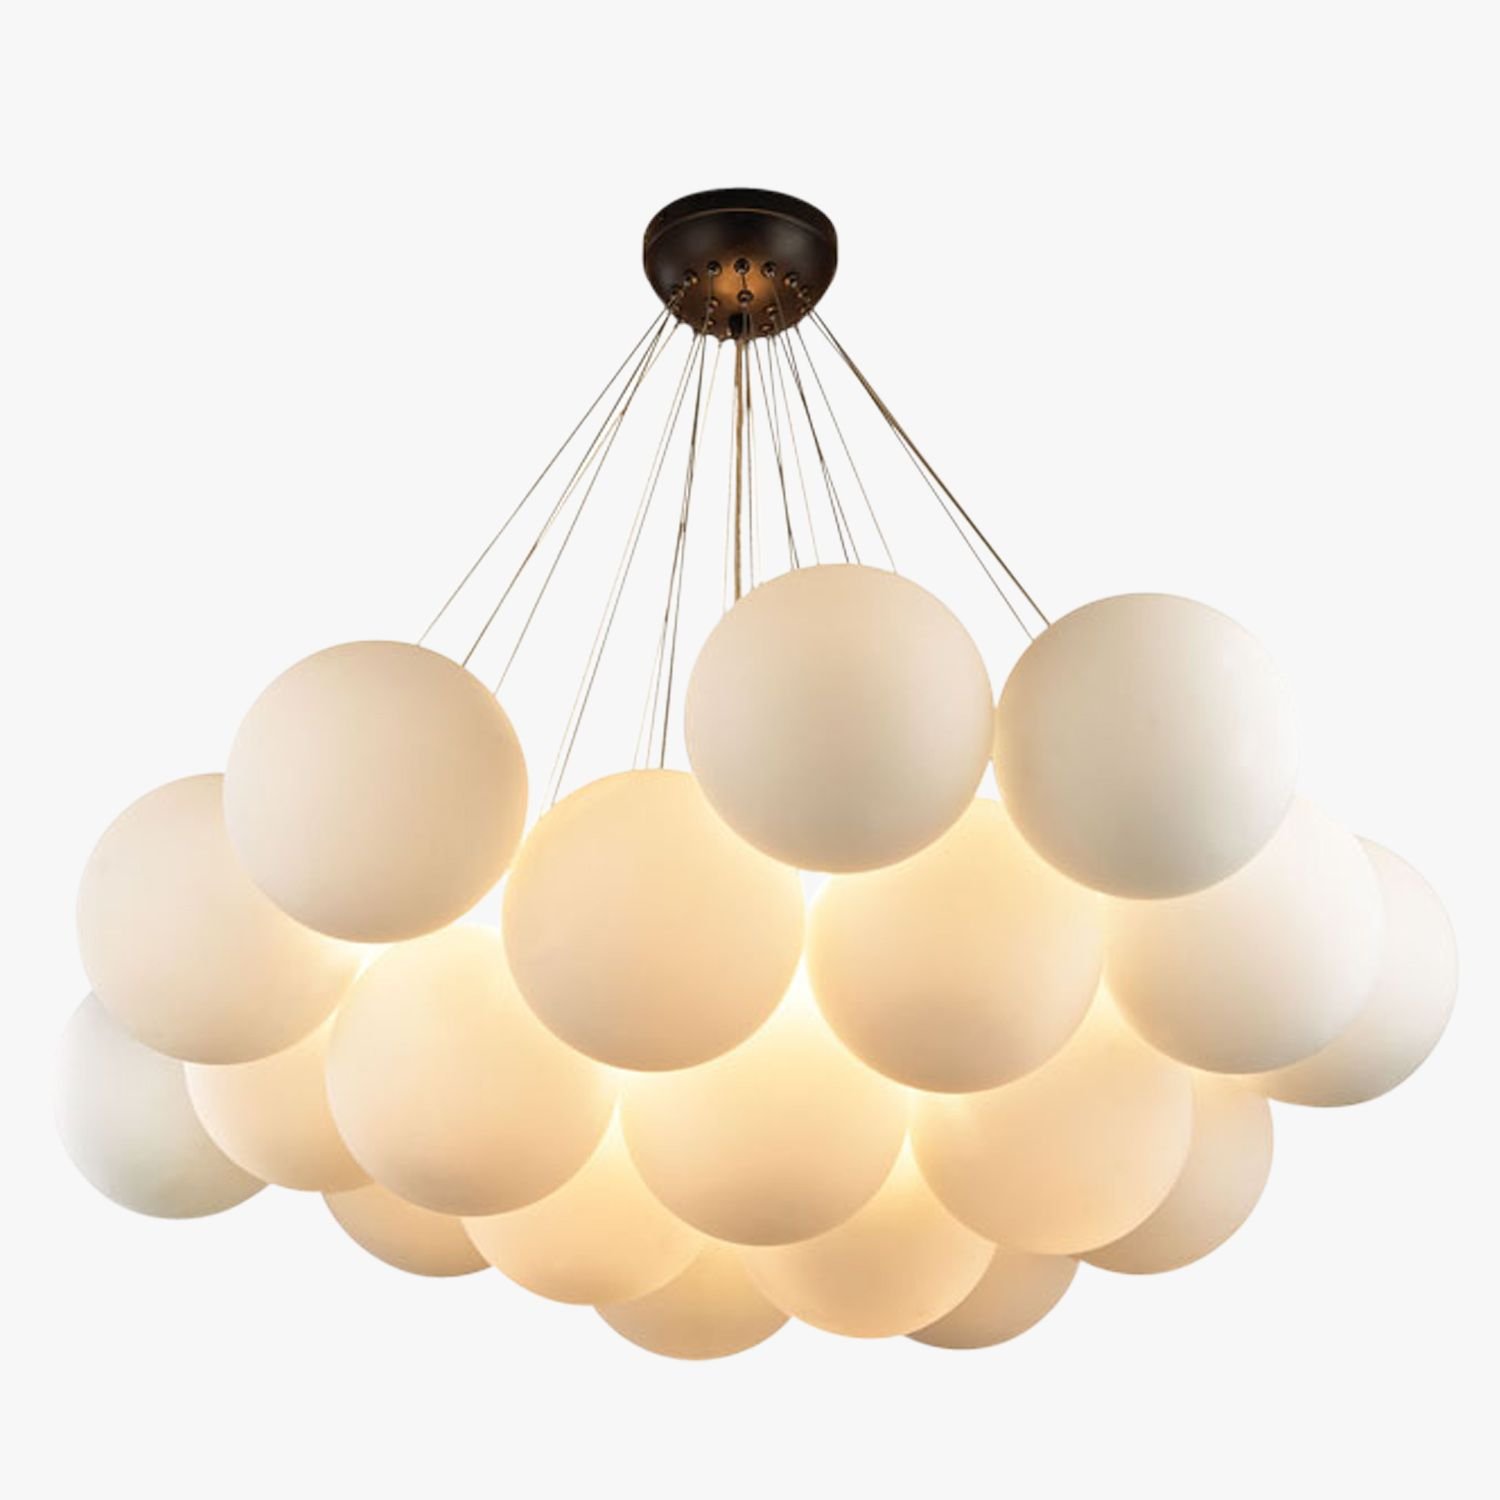 Светильники из шаров. Люстра large Frosted Bubble Chandelier. Люстра Bubble Amber. Люстра Bubble Round 32. Люстра balls White & Brass 9.